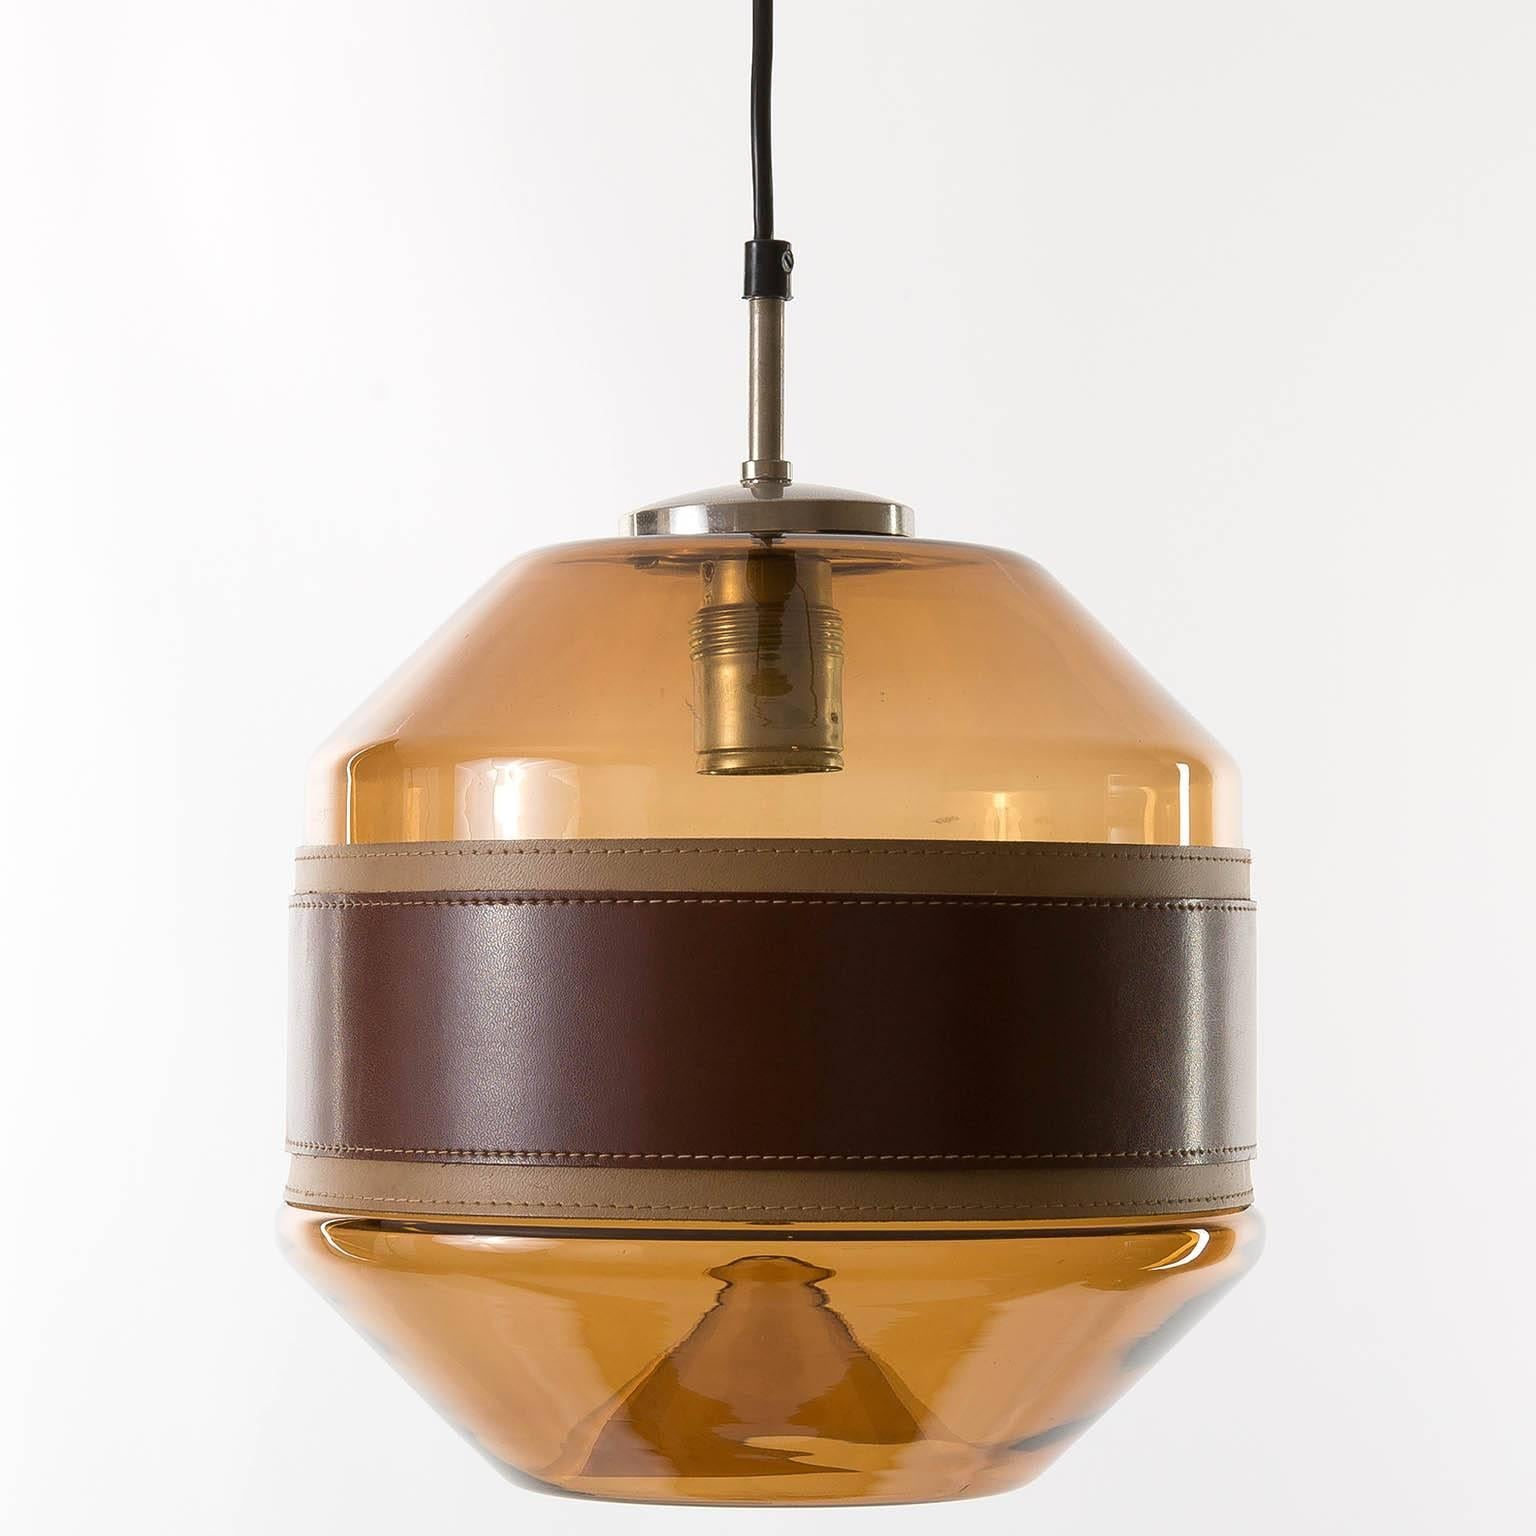 Beautiful and very rare glass pendant light or chandelier by Kalmar, manufactured in Mid-Century circa 1970 (at the end of 1960s and beginning of 1970s). It is made of a chromed hardware and an amber toned glass body with a belt made of two layers